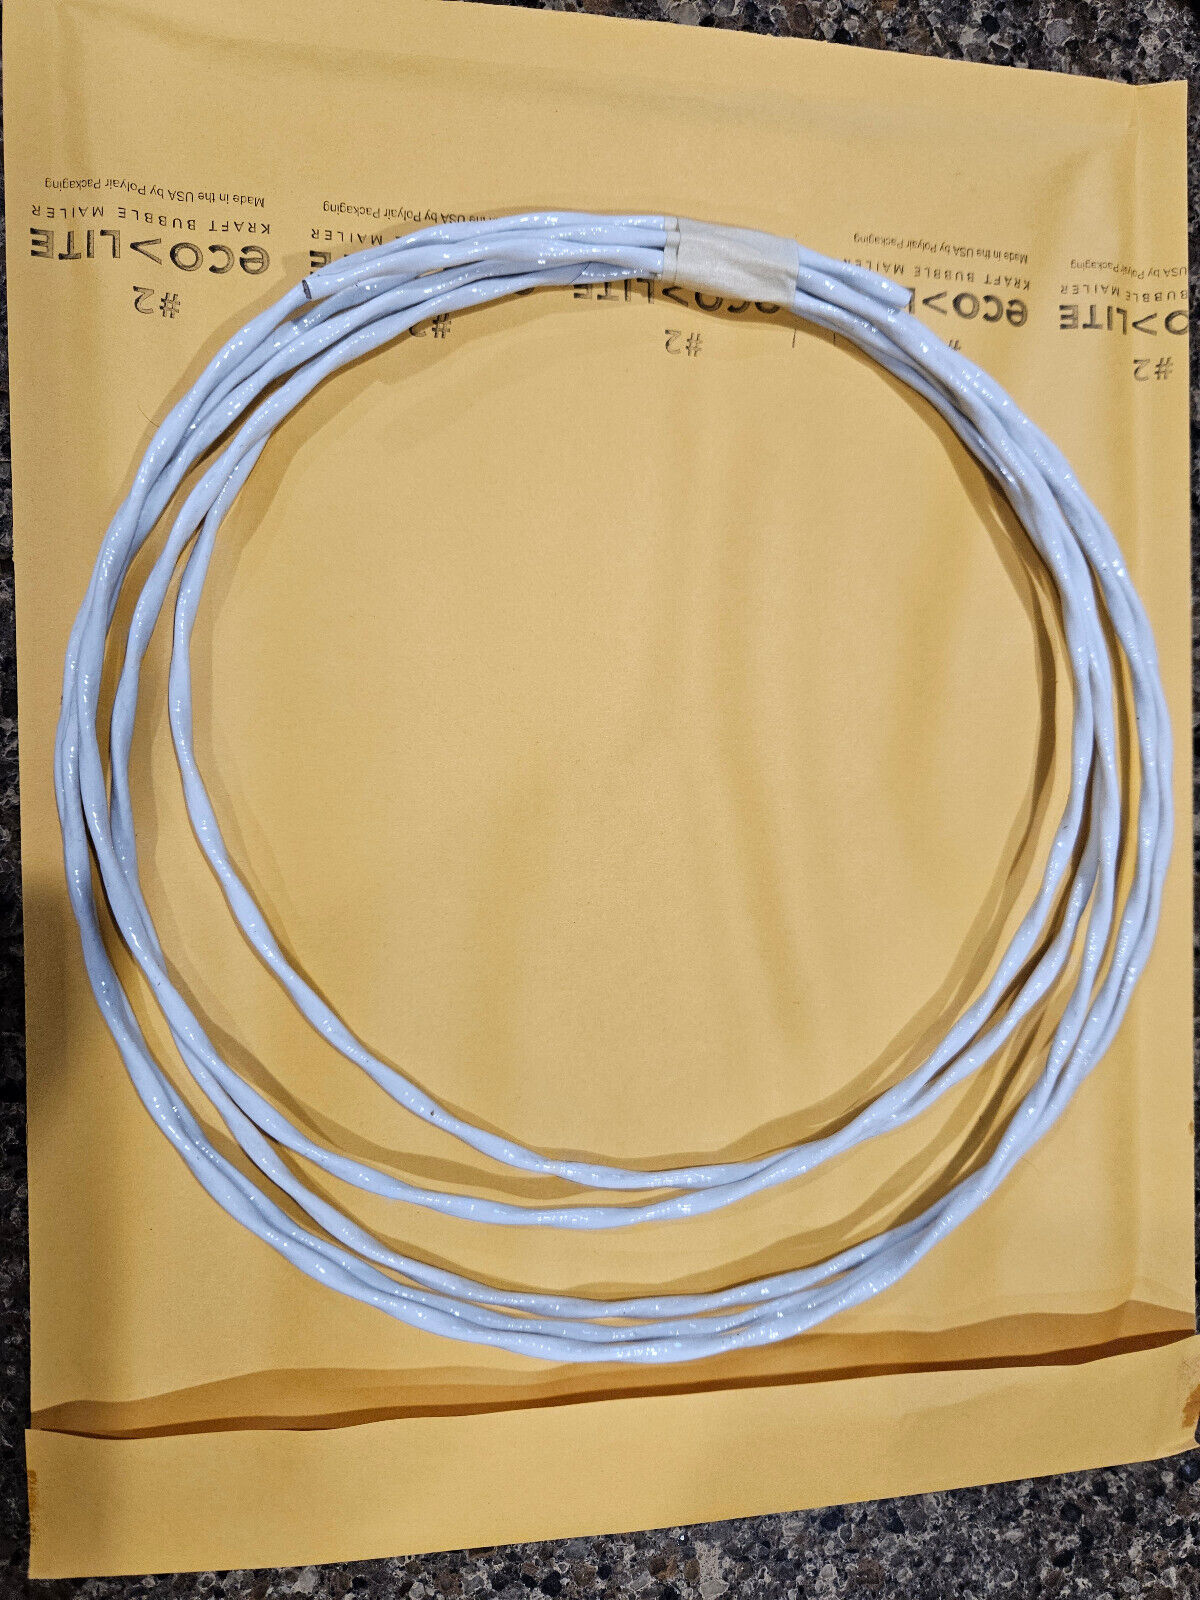 M27500-18TG2T14 Aircraft Wire, 18 AWG 2 Conductor Shielded Cable, 10 foot length